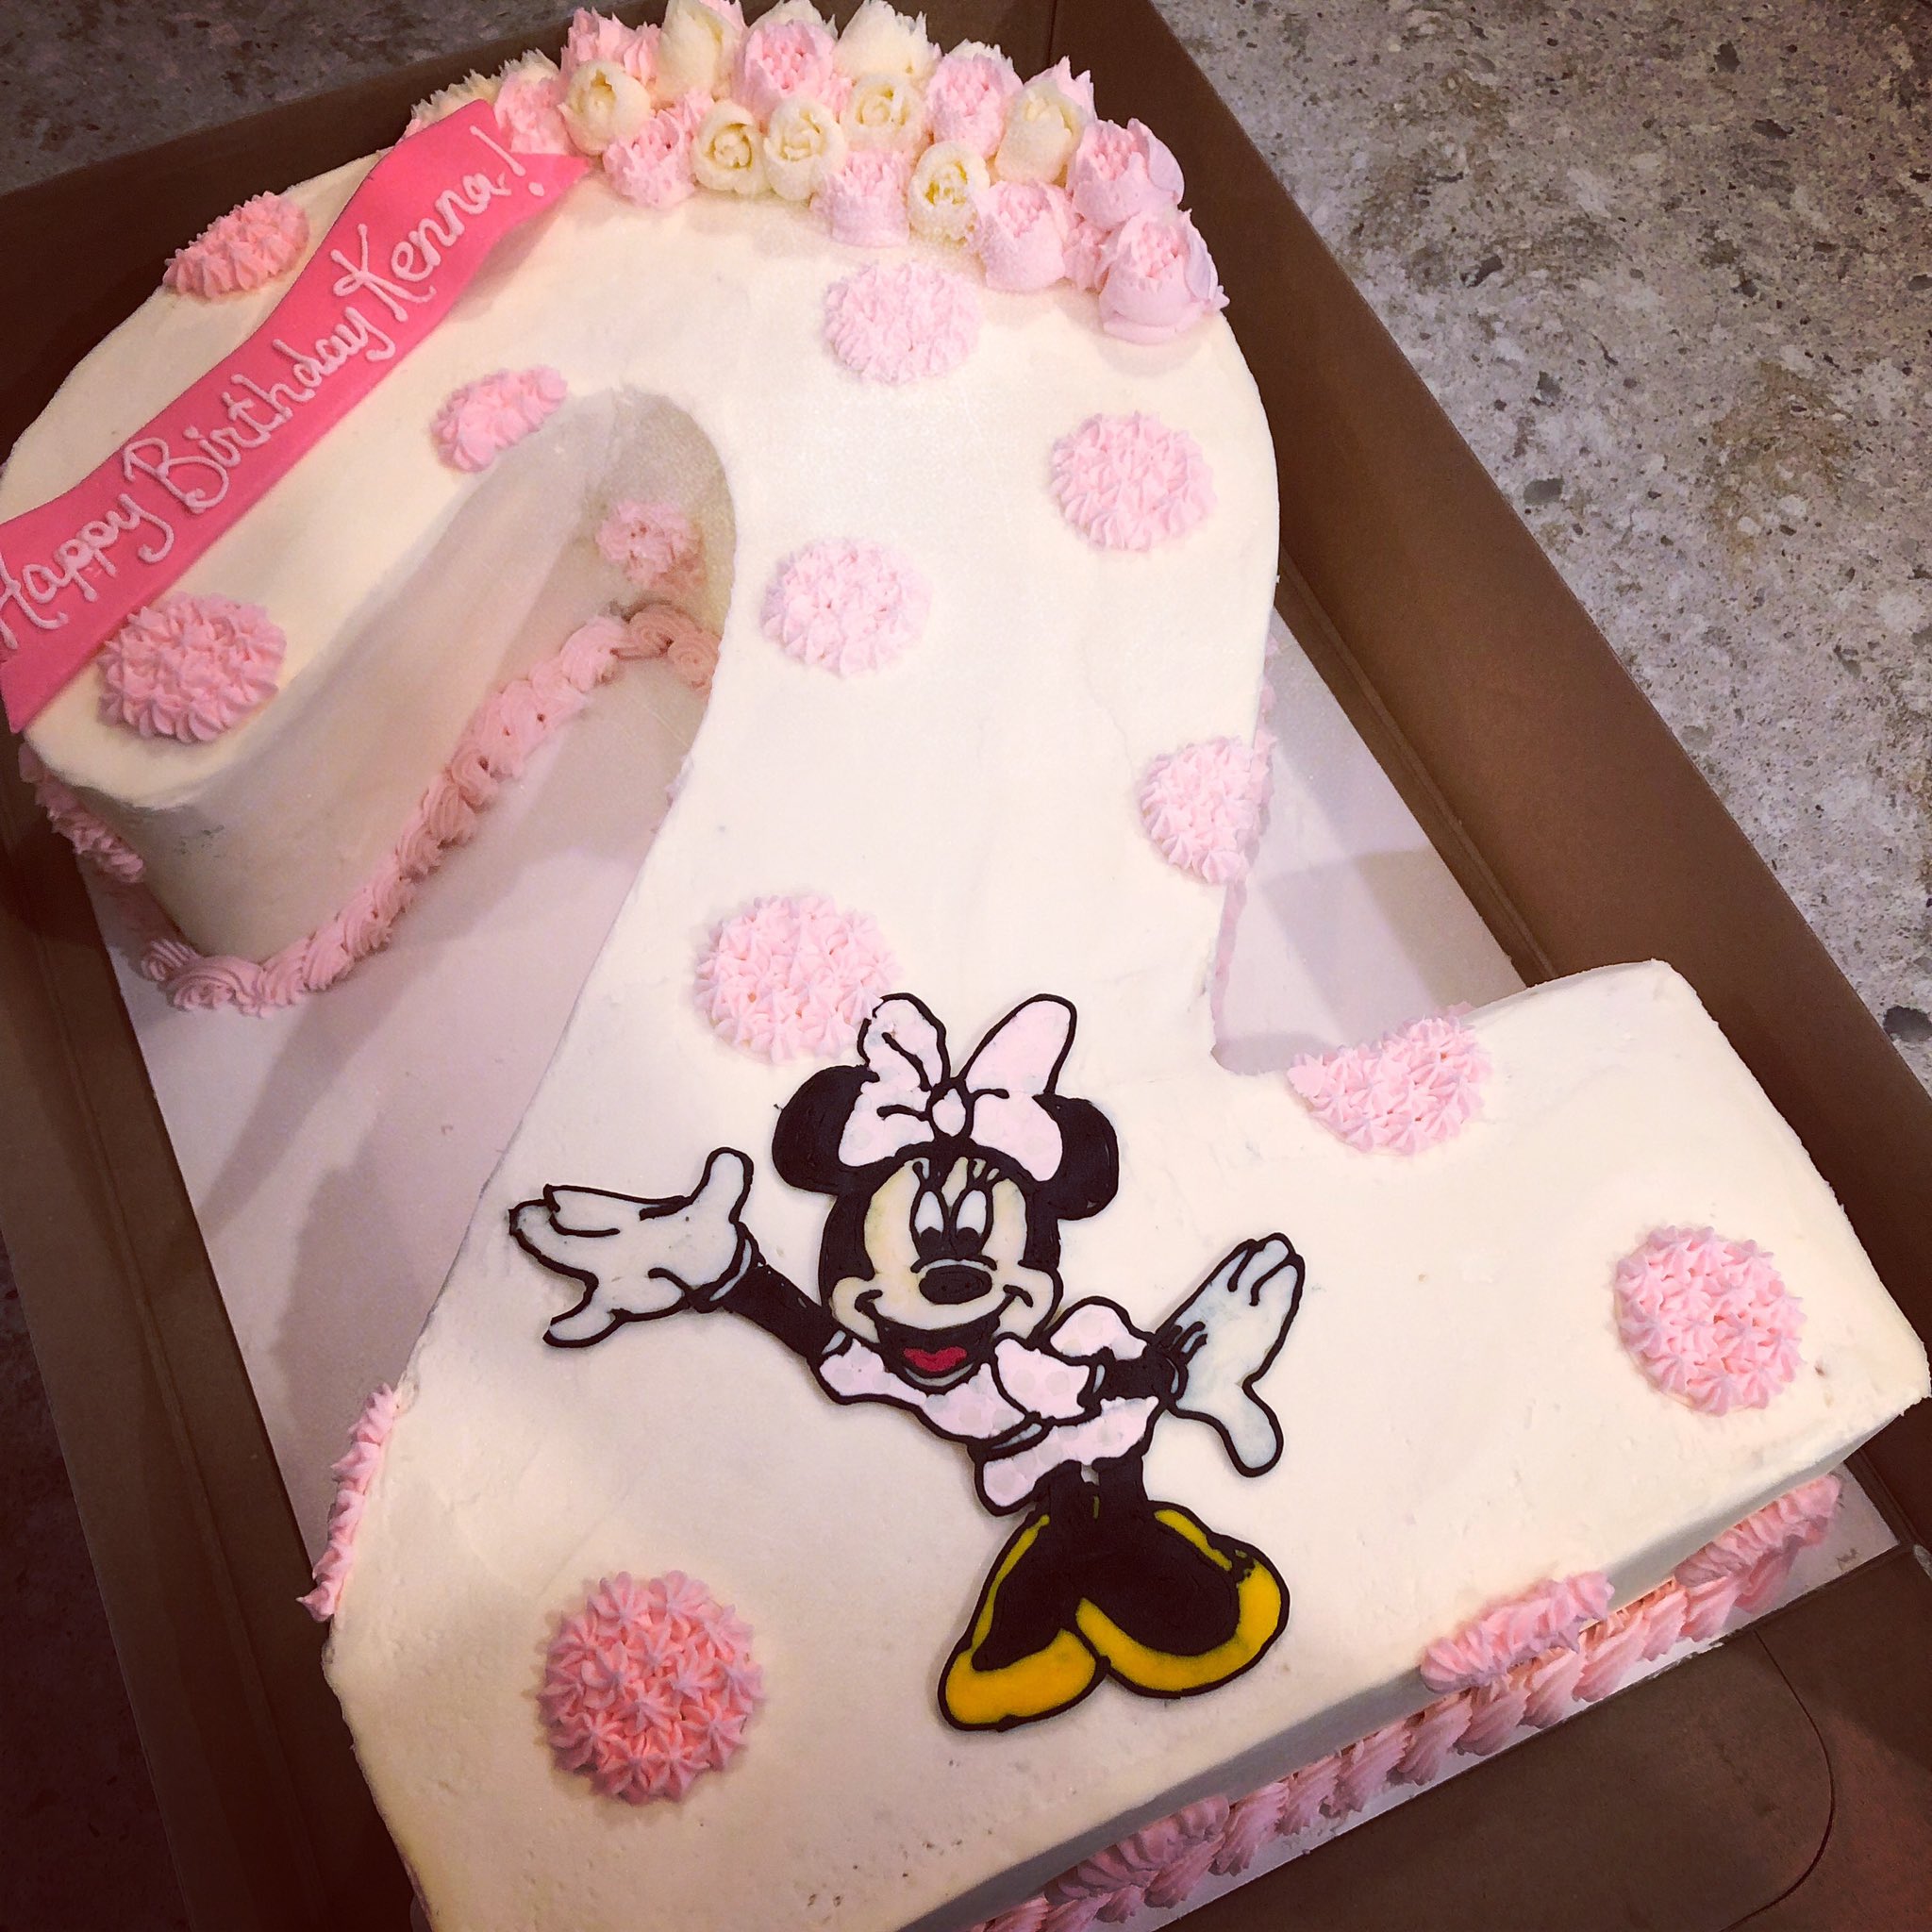 New Minnie Mouse Dome Cake is Nutty, Citrussy, and Sweet All-at-Once! -  MickeyBlog.com